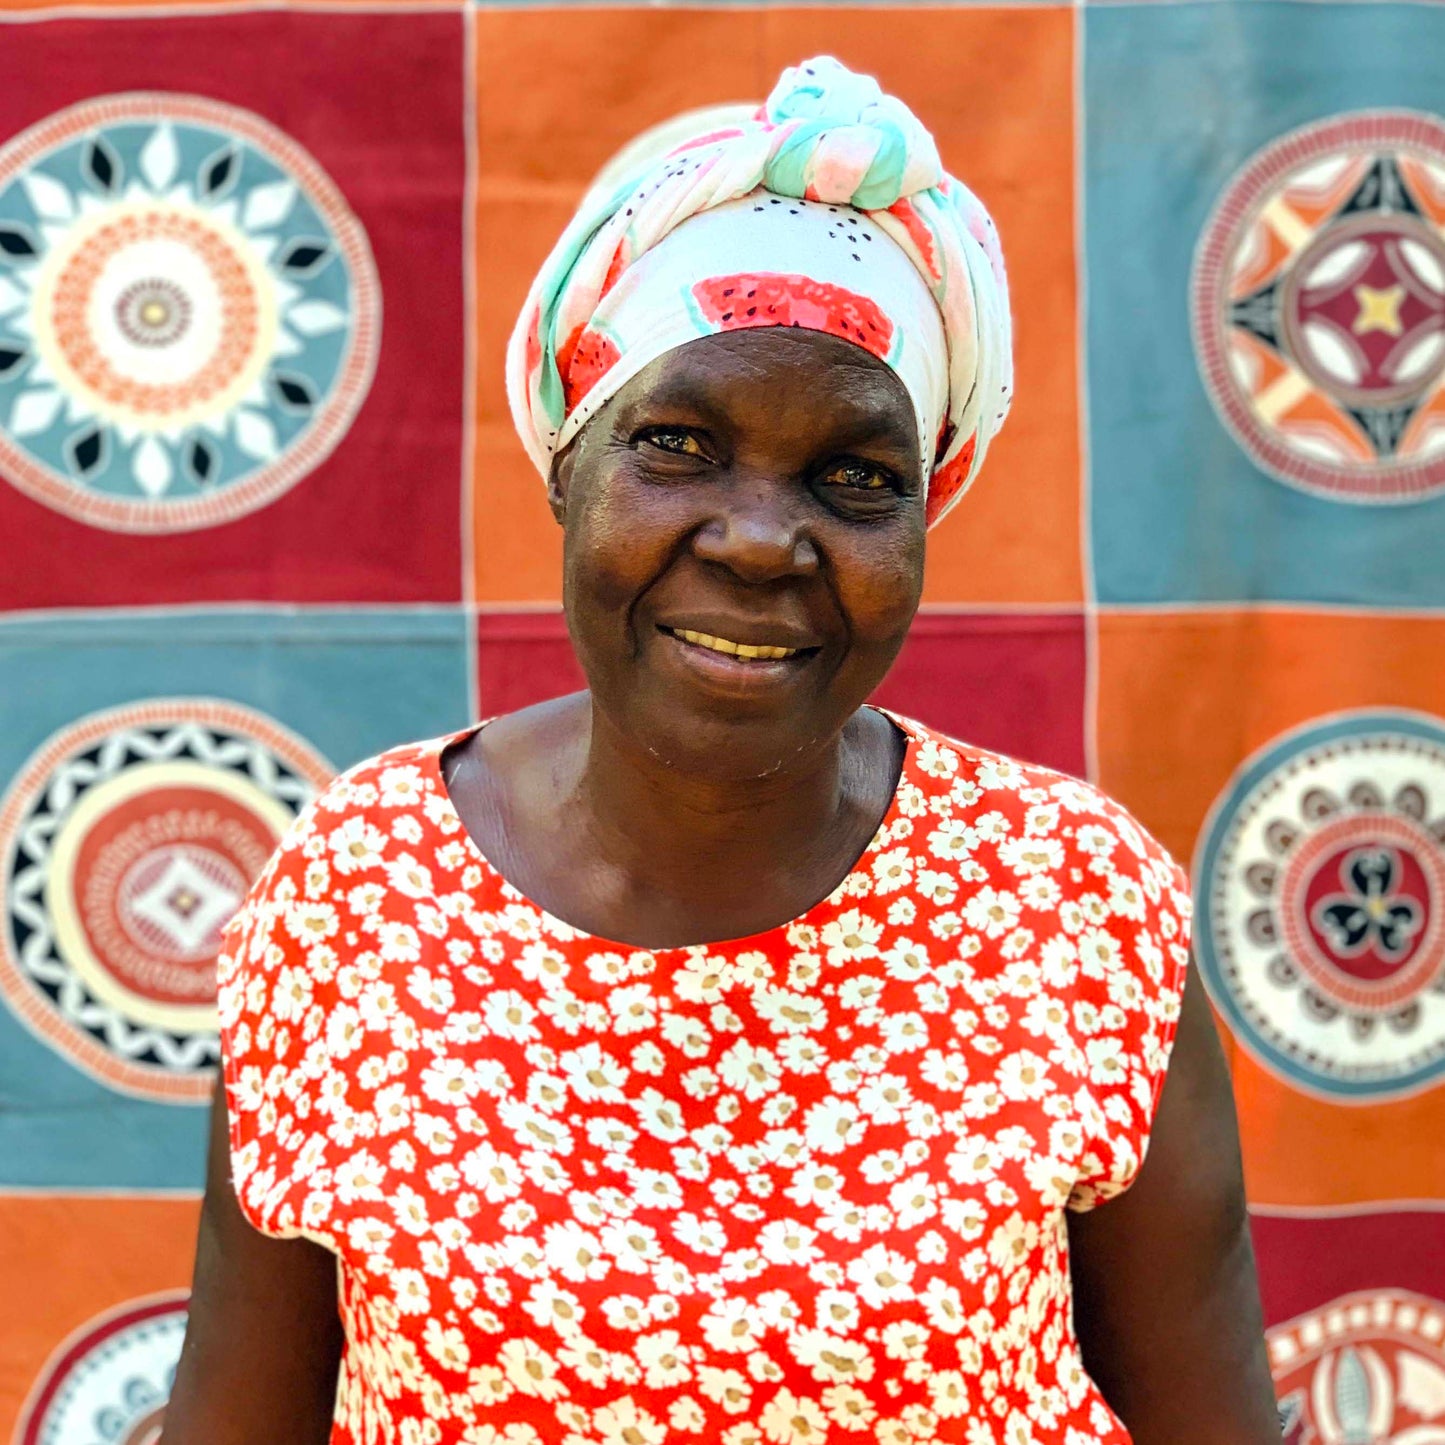 Zambia & France Cross Cultural Collaboration, Tribal Textiles, Hand-Painted Textiles